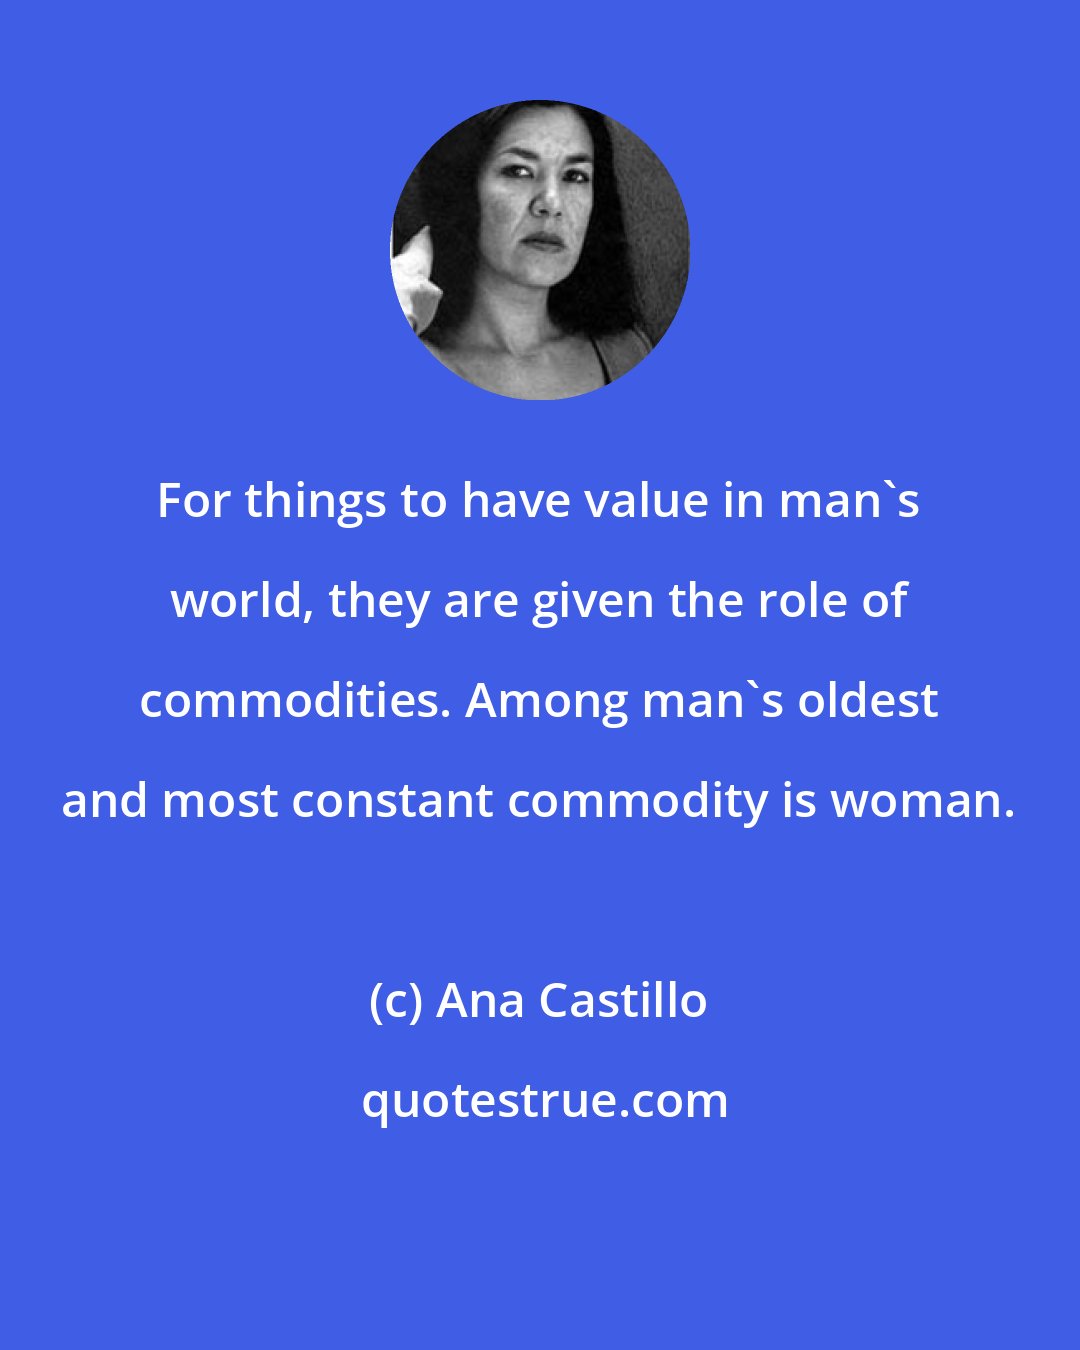 Ana Castillo: For things to have value in man's world, they are given the role of commodities. Among man's oldest and most constant commodity is woman.